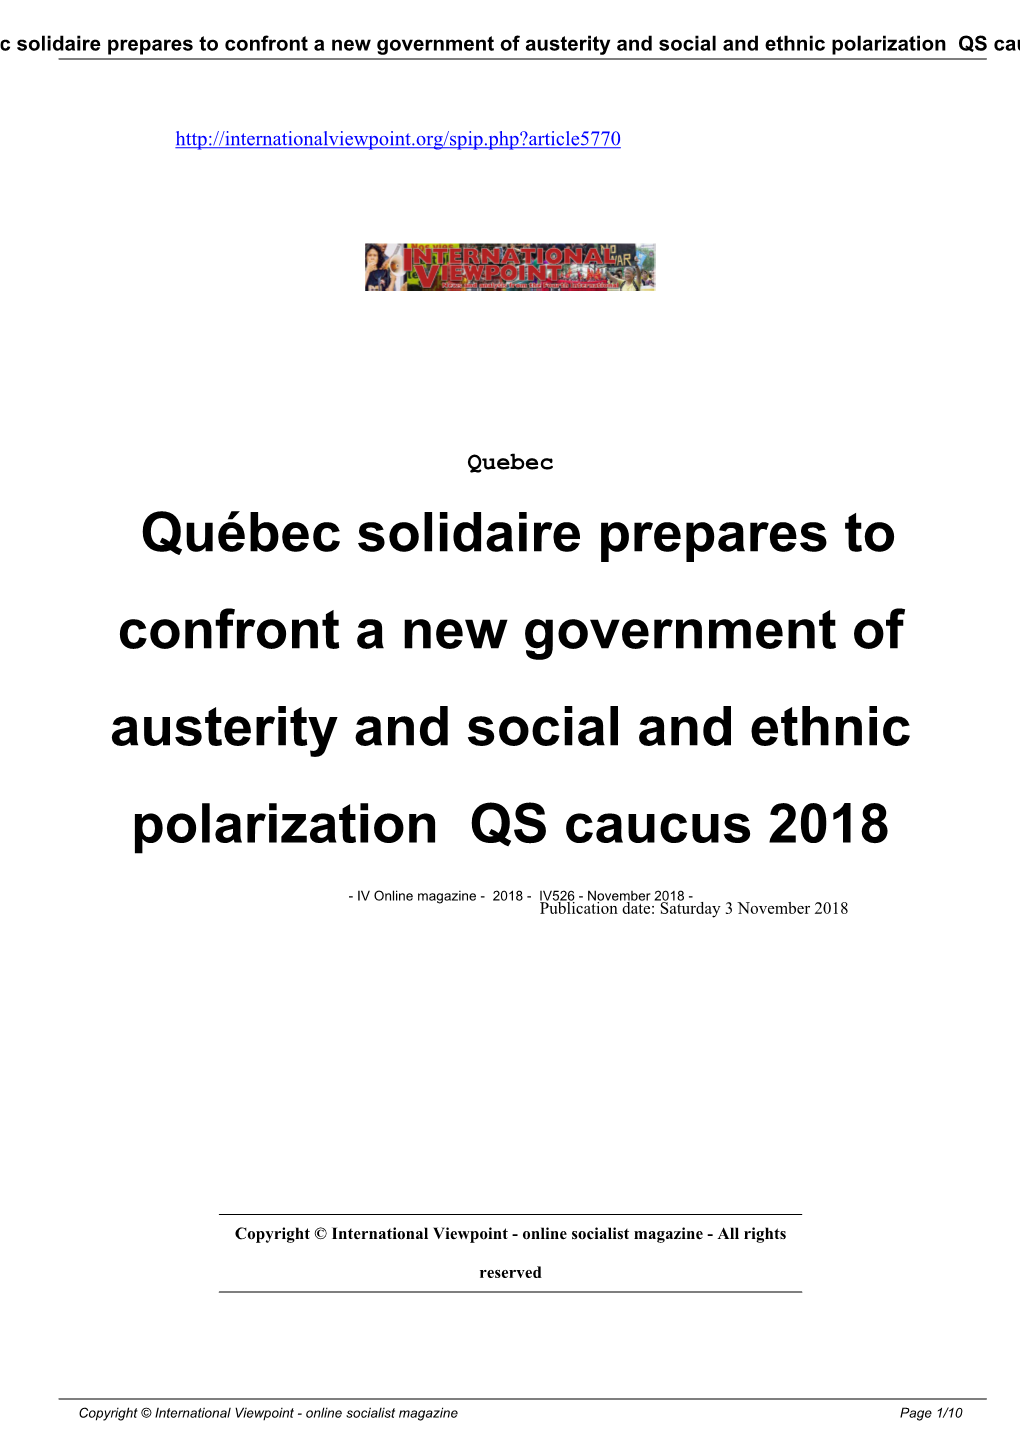 Québec Solidaire Prepares to Confront a New Government of Austerity and Social and Ethnic Polarization QS Caucus 2018